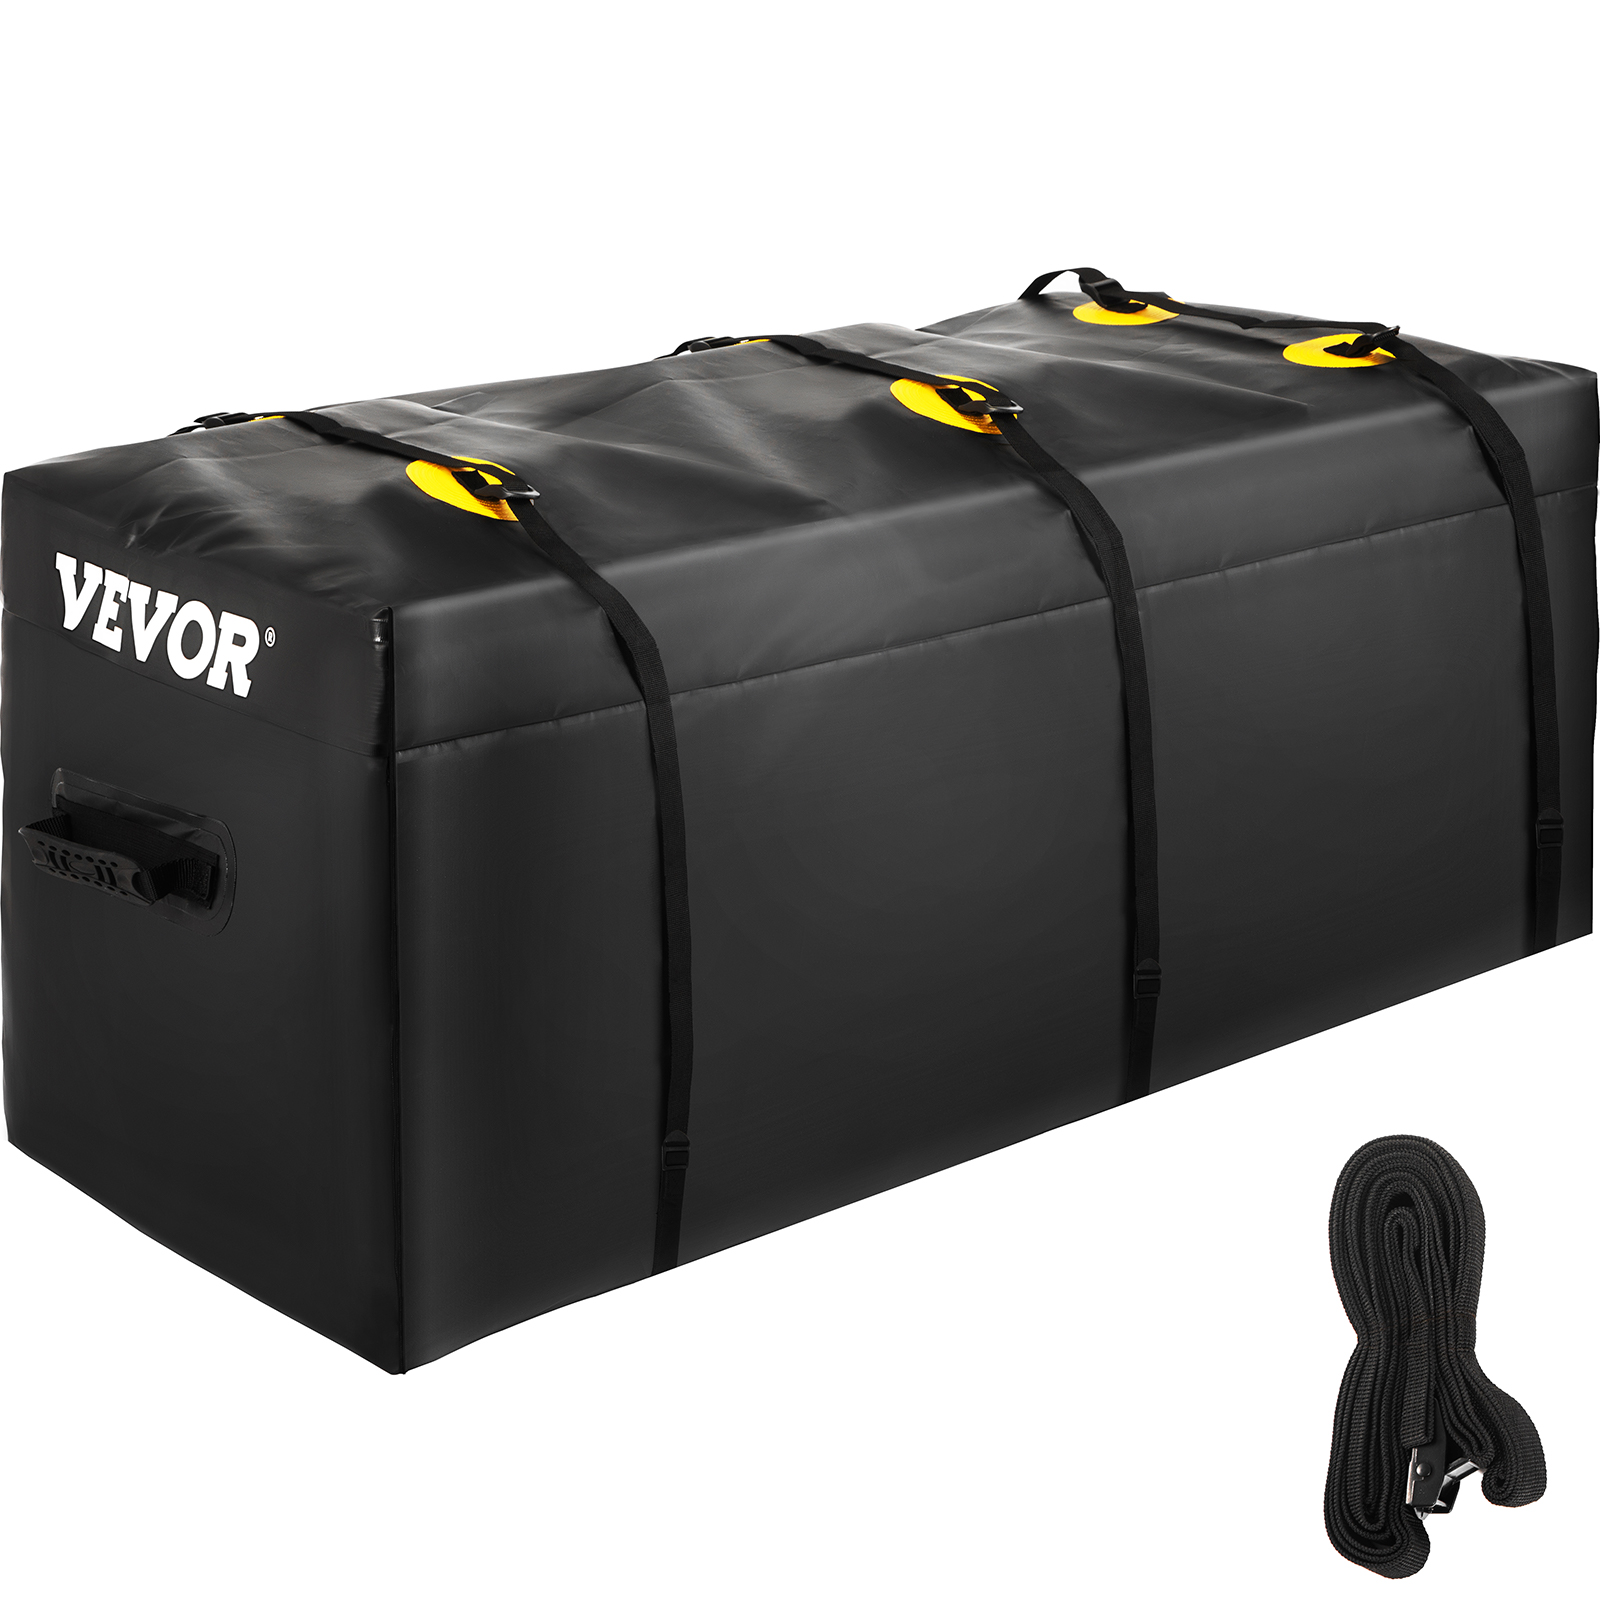 VEVOR Hitch Cargo Carrier Bag, Waterproof 840D PVC, 60x24x26 (22 Cubic  Feet), Heavy Duty Cargo Bag for Hitch Carrier with Reinforced Straps, Fits